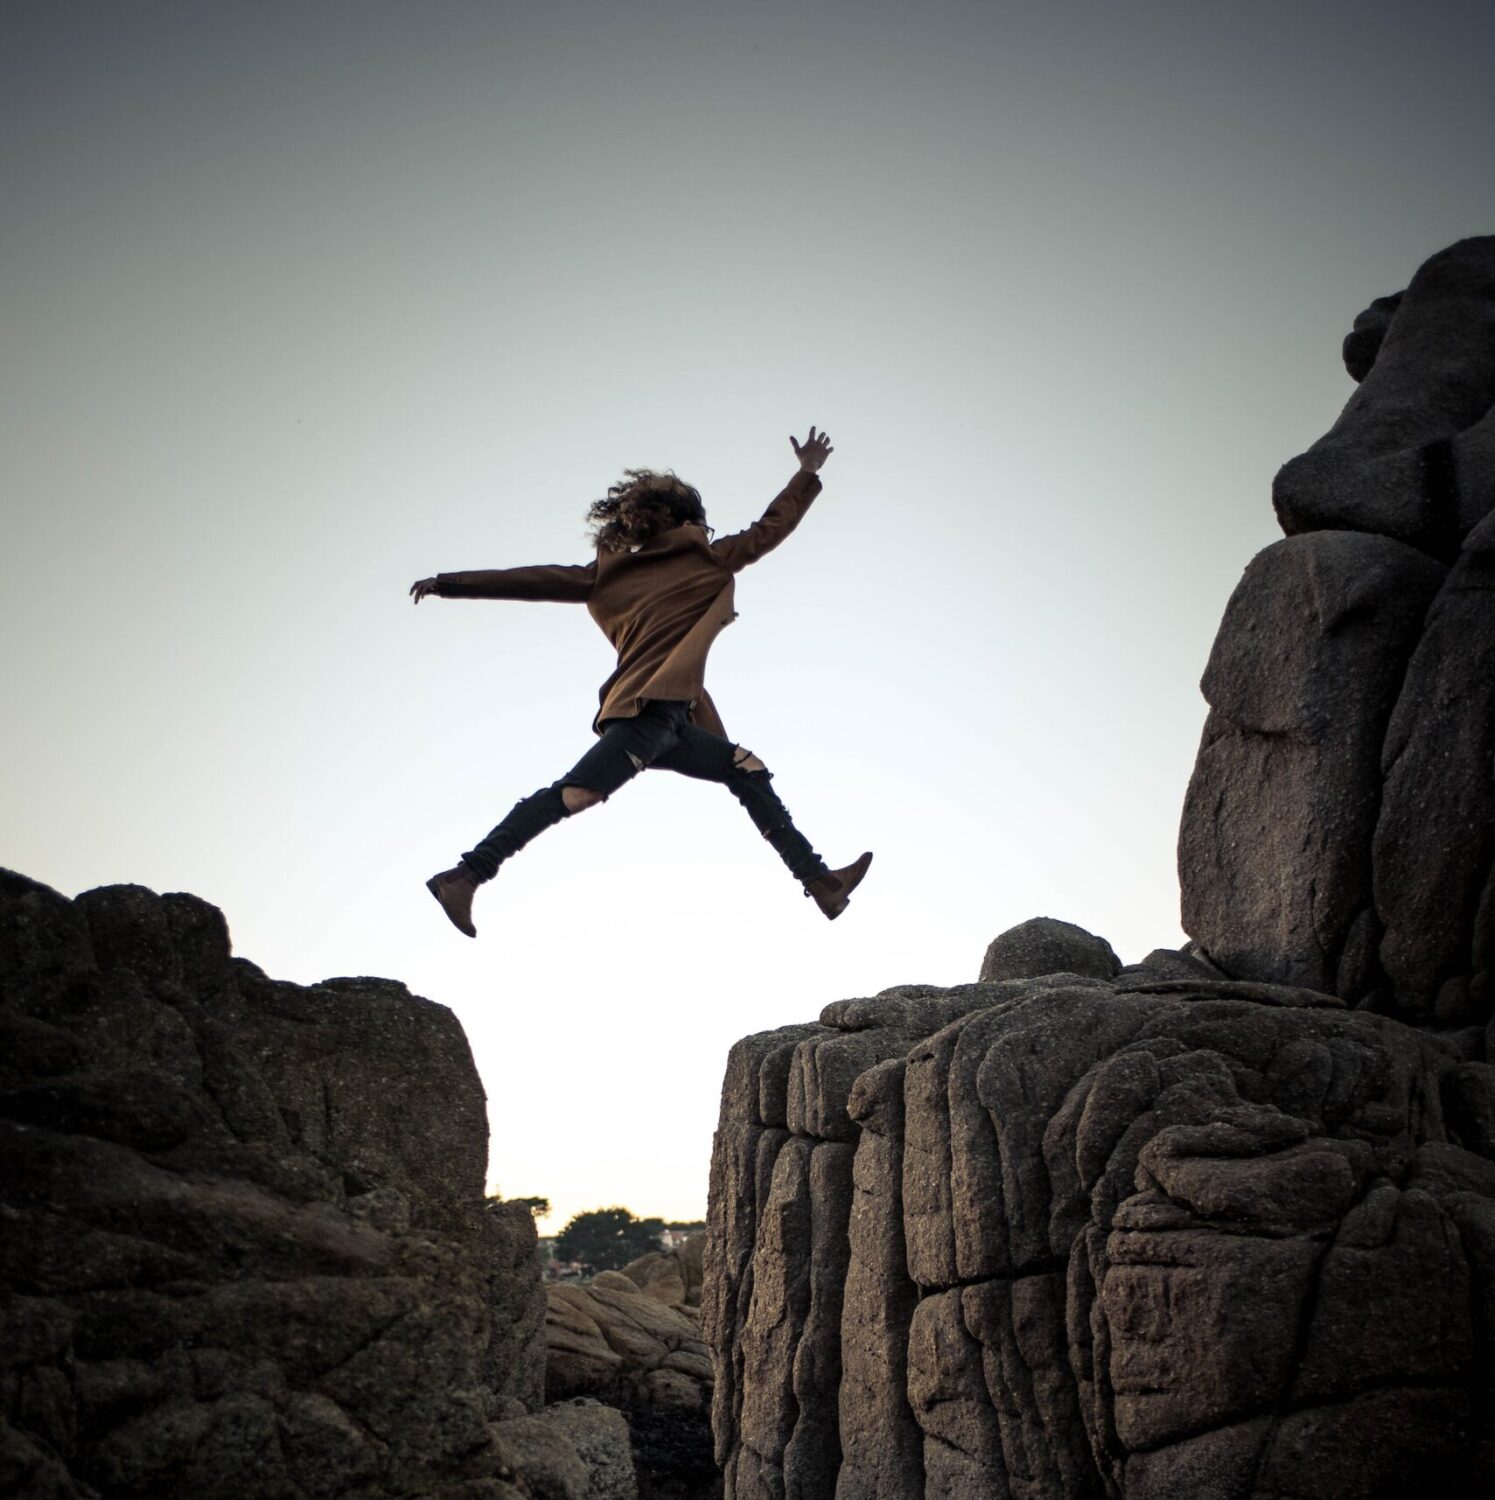 The Risk of Being Risk-Averse: Departing the Comfort Zone